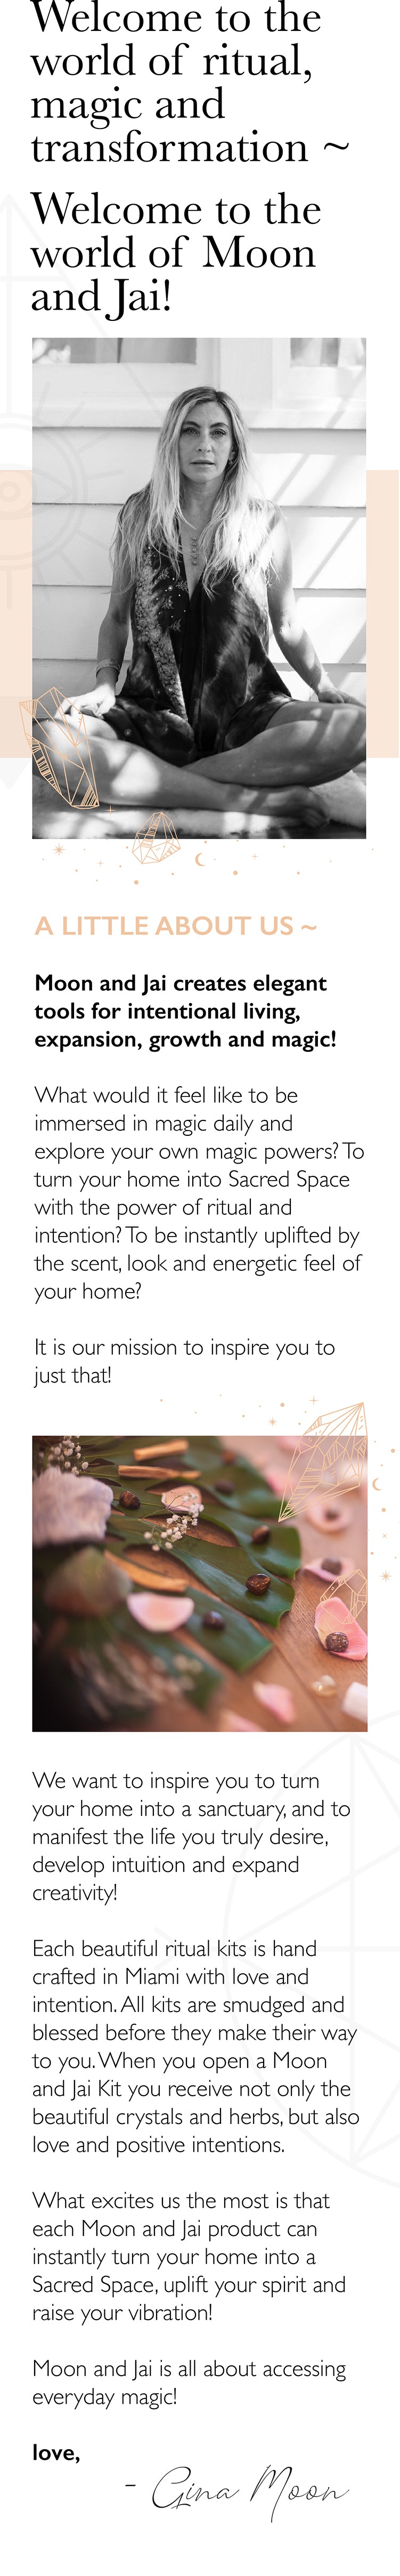 We are Moon and Jai, and we are so glad you are here A LITTLE ABOUT US Our favorite pastime is to explore the power of intention, ritual and flow. We love to inspire you to create spontaneous magic in your life!